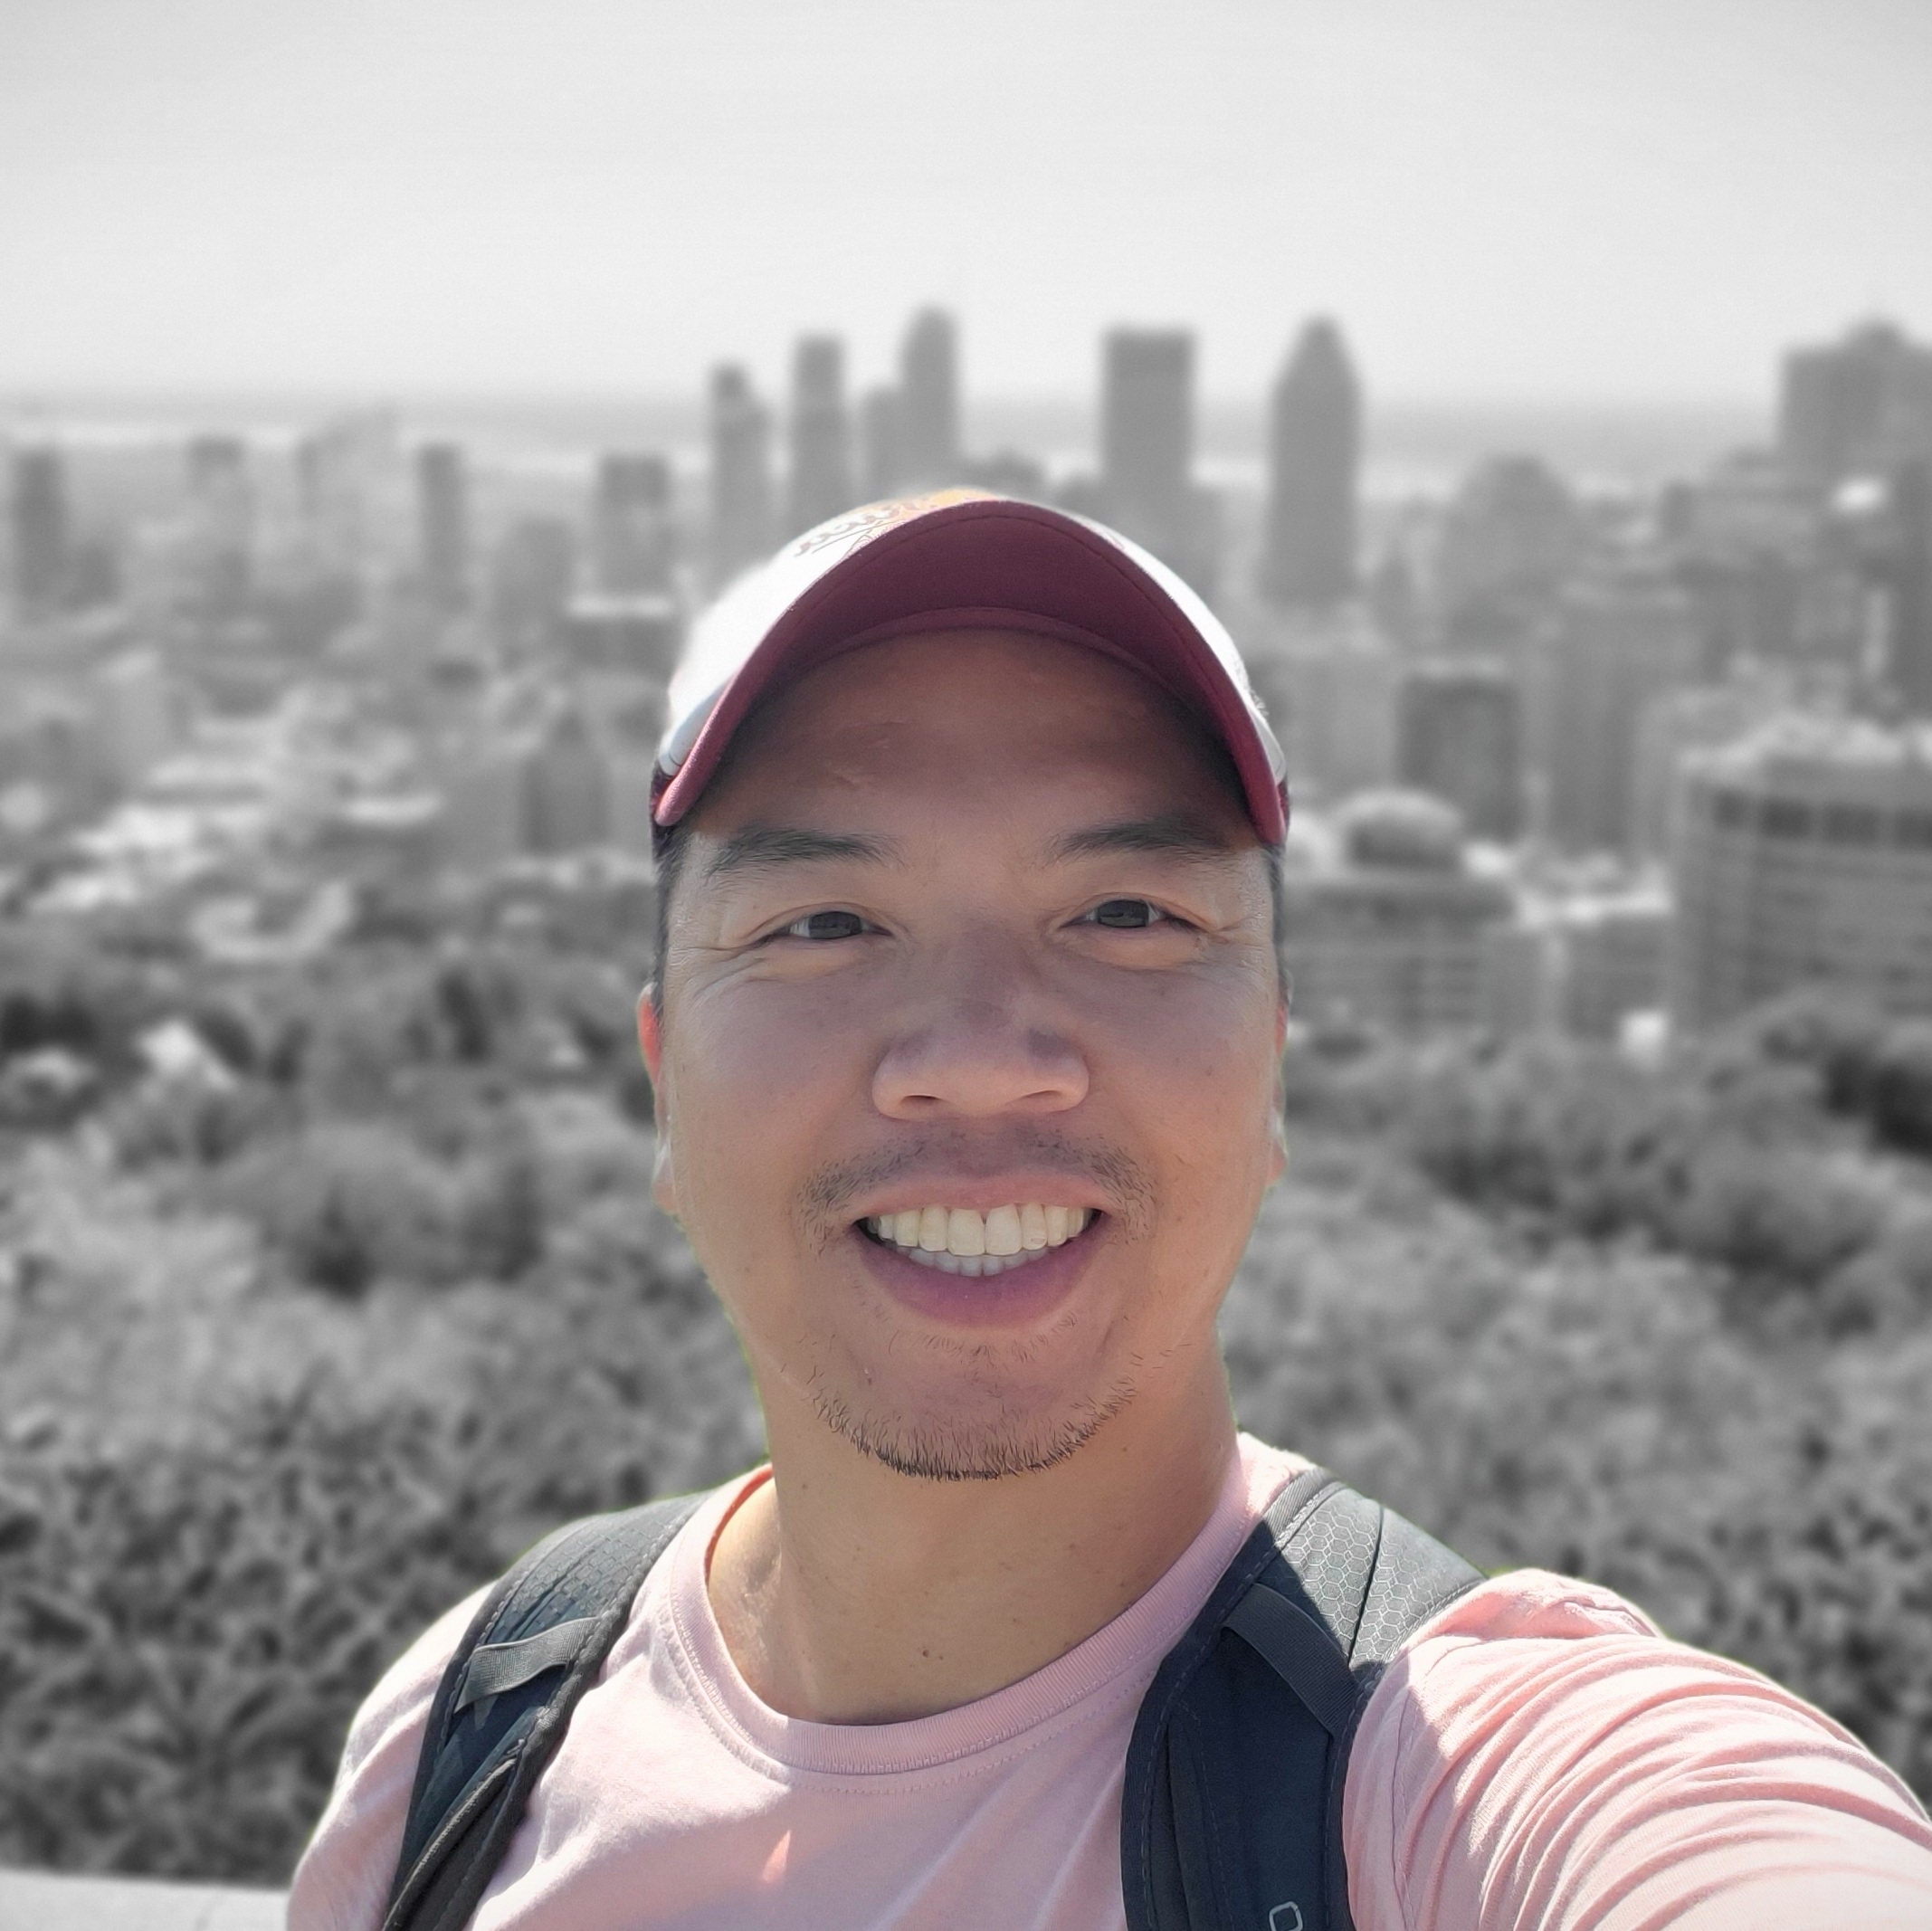 Brian smiling smiling in front of a cityscape.